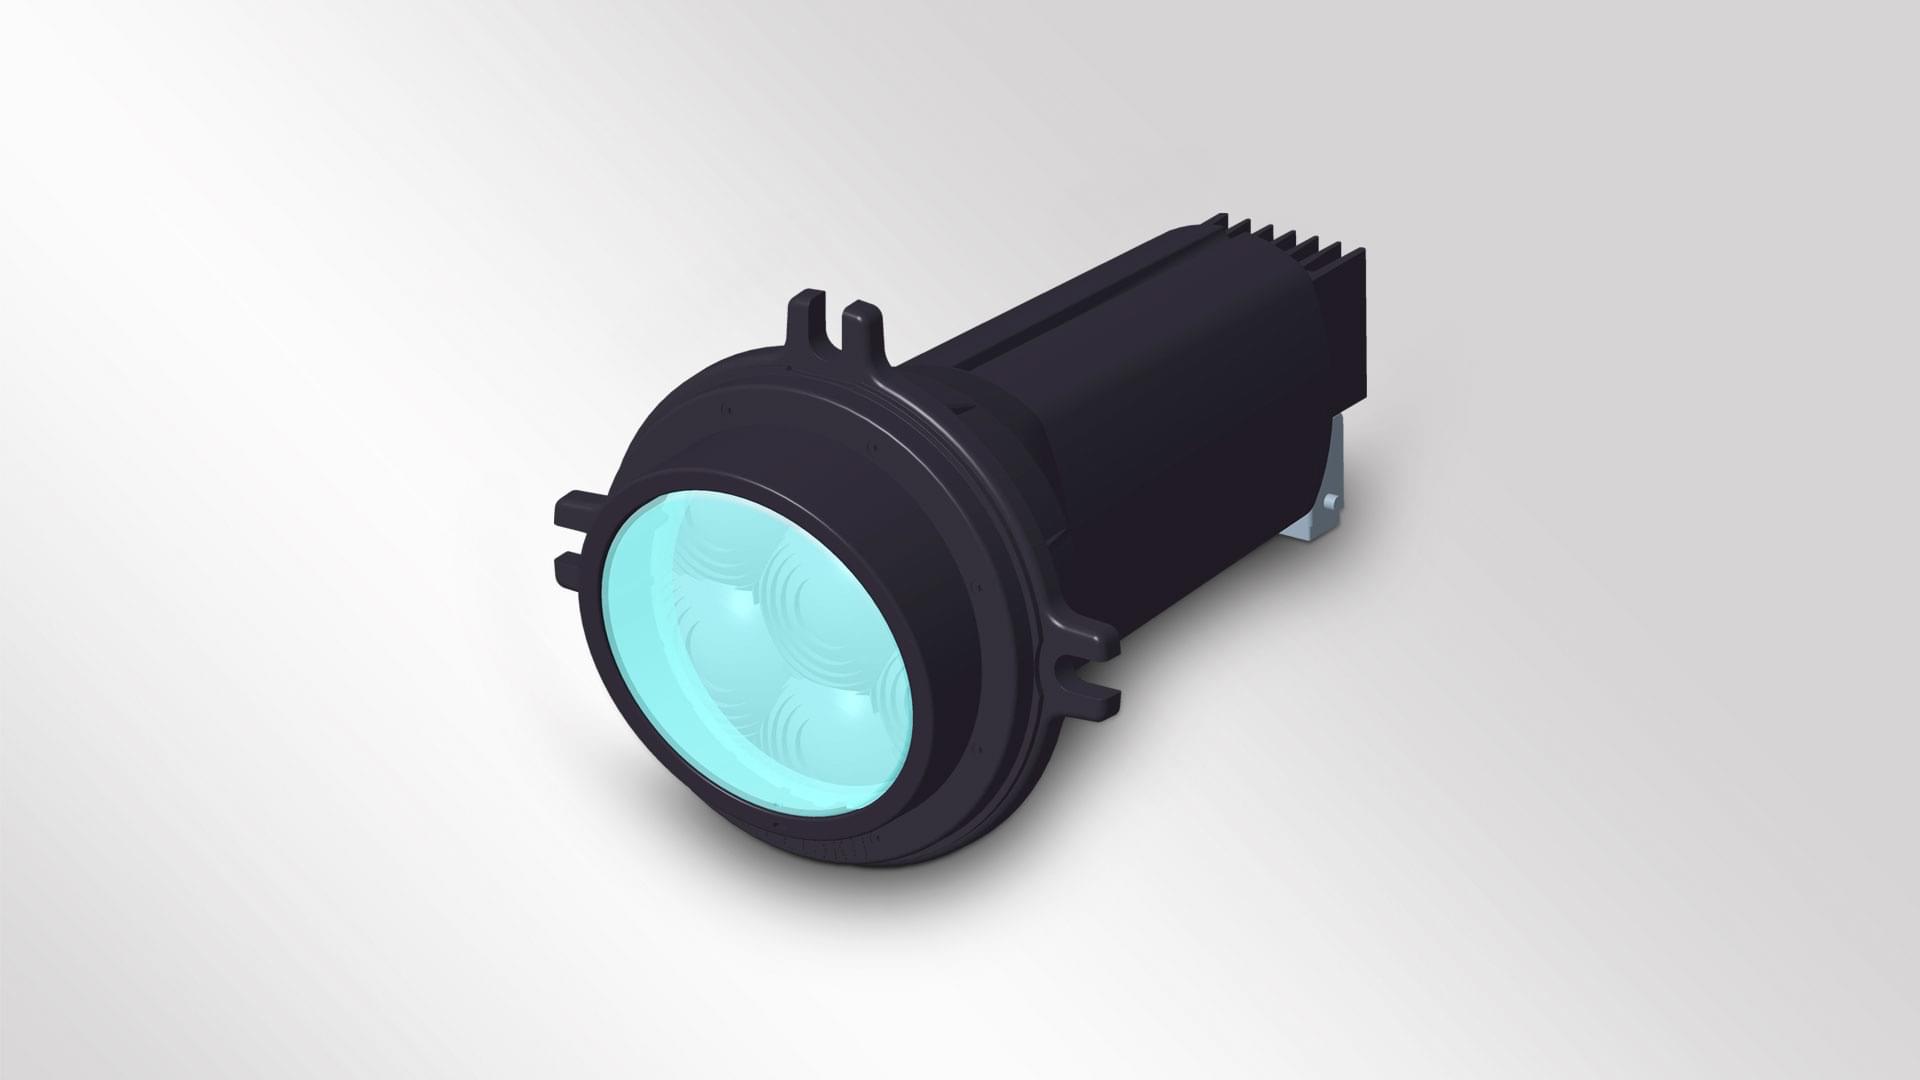 The excellent visibility of the LED Signal EU is the result of a combination of high power LED as a central light source and a special lens system.